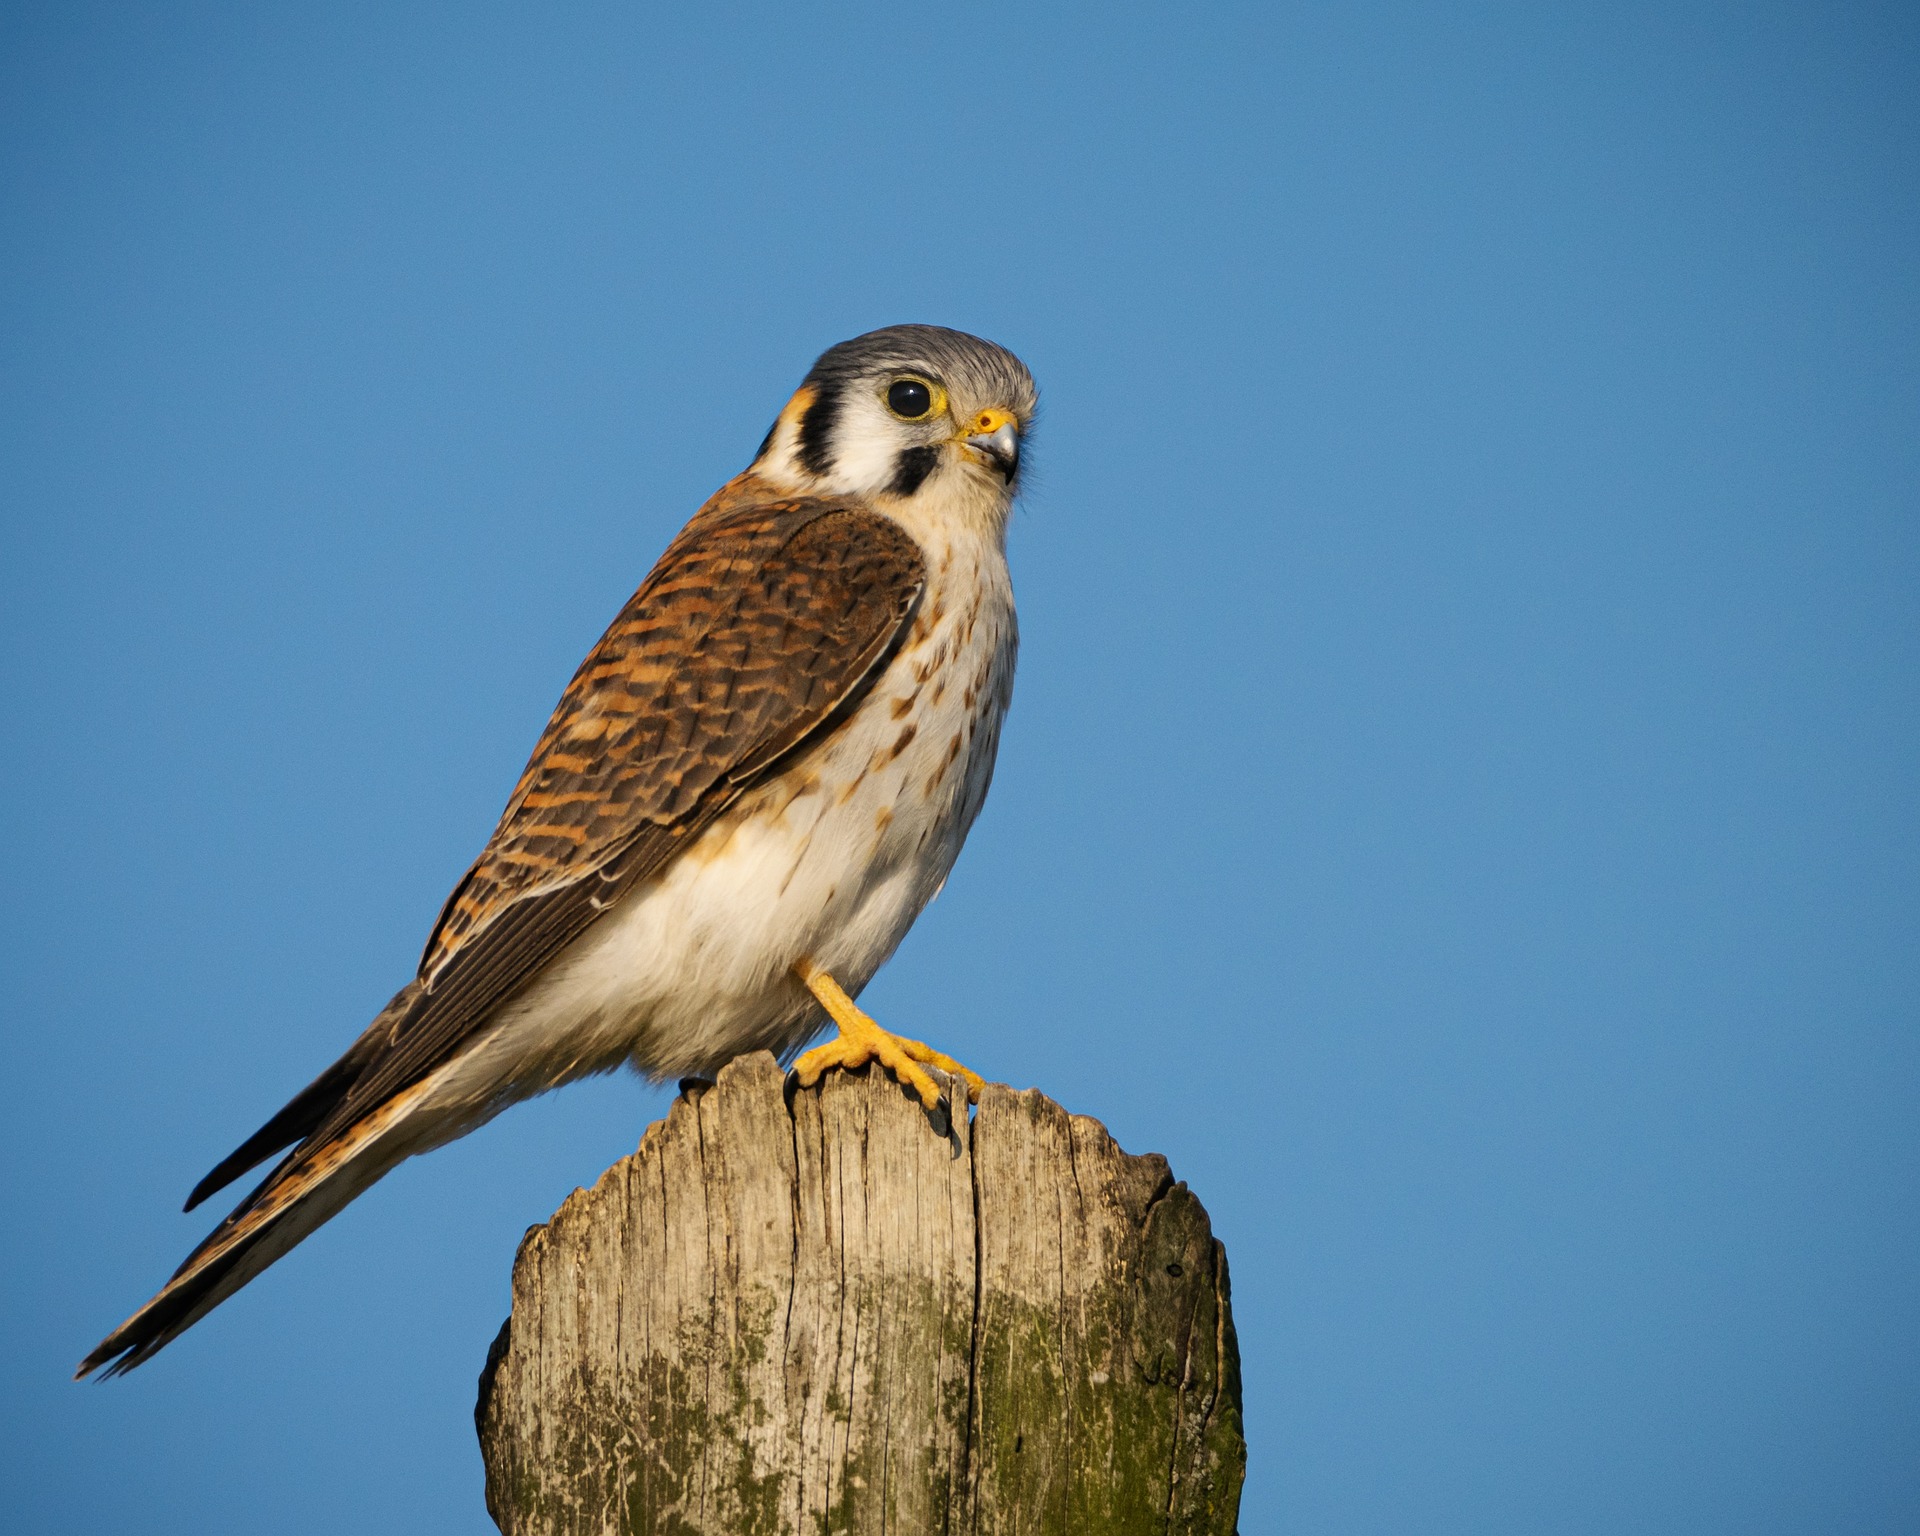 See red-tailed hawks and more when enjoying Scottsdale bird watching